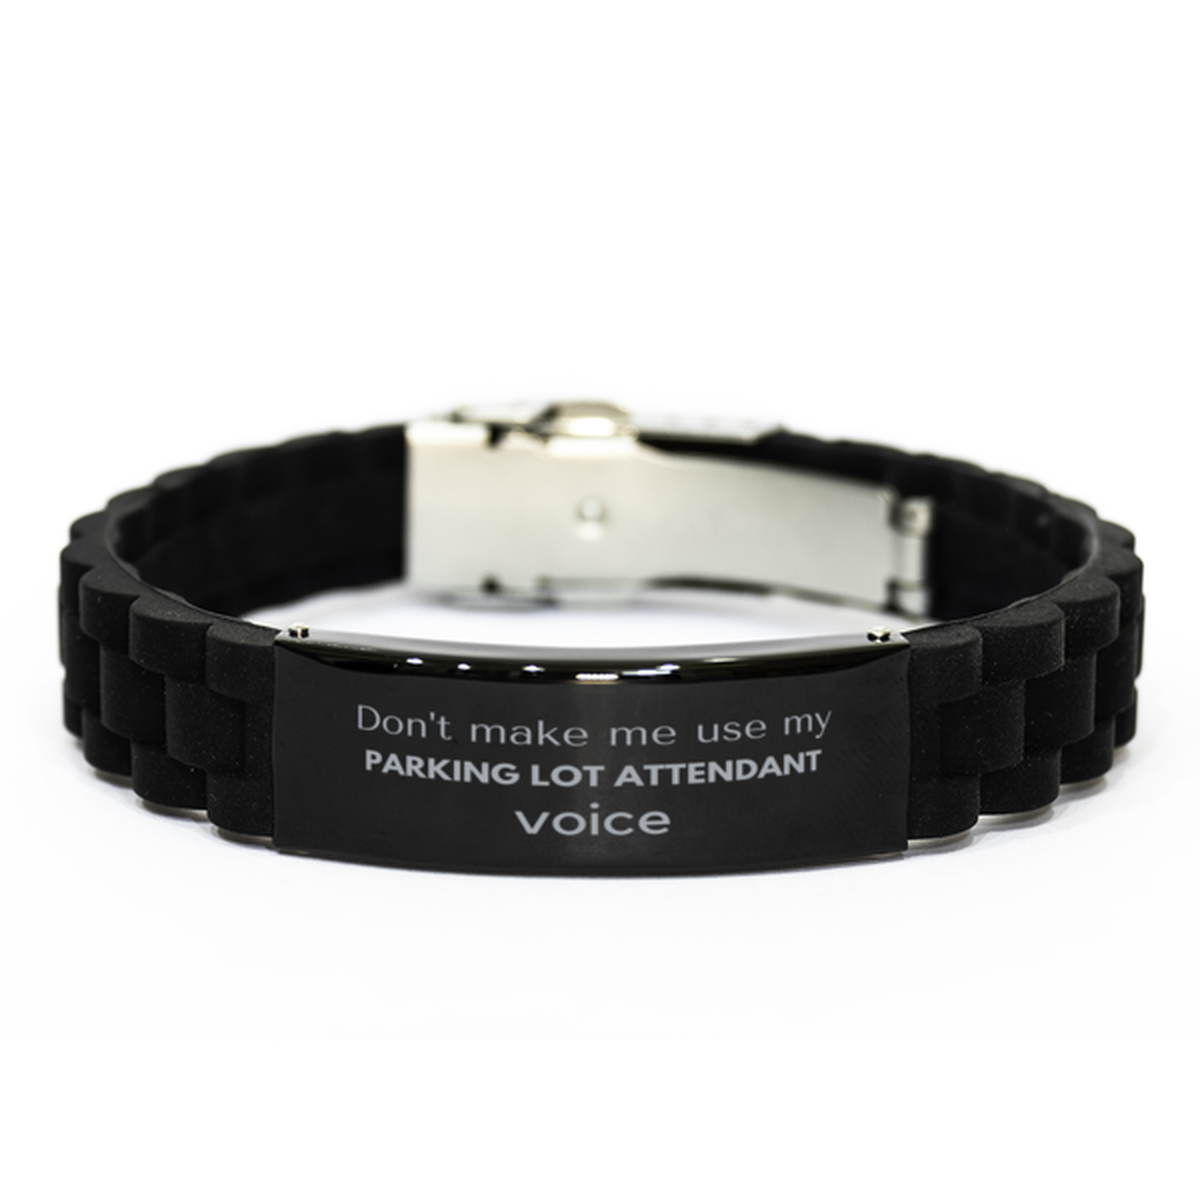 Don't make me use my Parking Lot Attendant voice, Sarcasm Parking Lot Attendant Gifts, Christmas Parking Lot Attendant Black Glidelock Clasp Bracelet Birthday Unique Gifts For Parking Lot Attendant Coworkers, Men, Women, Colleague, Friends